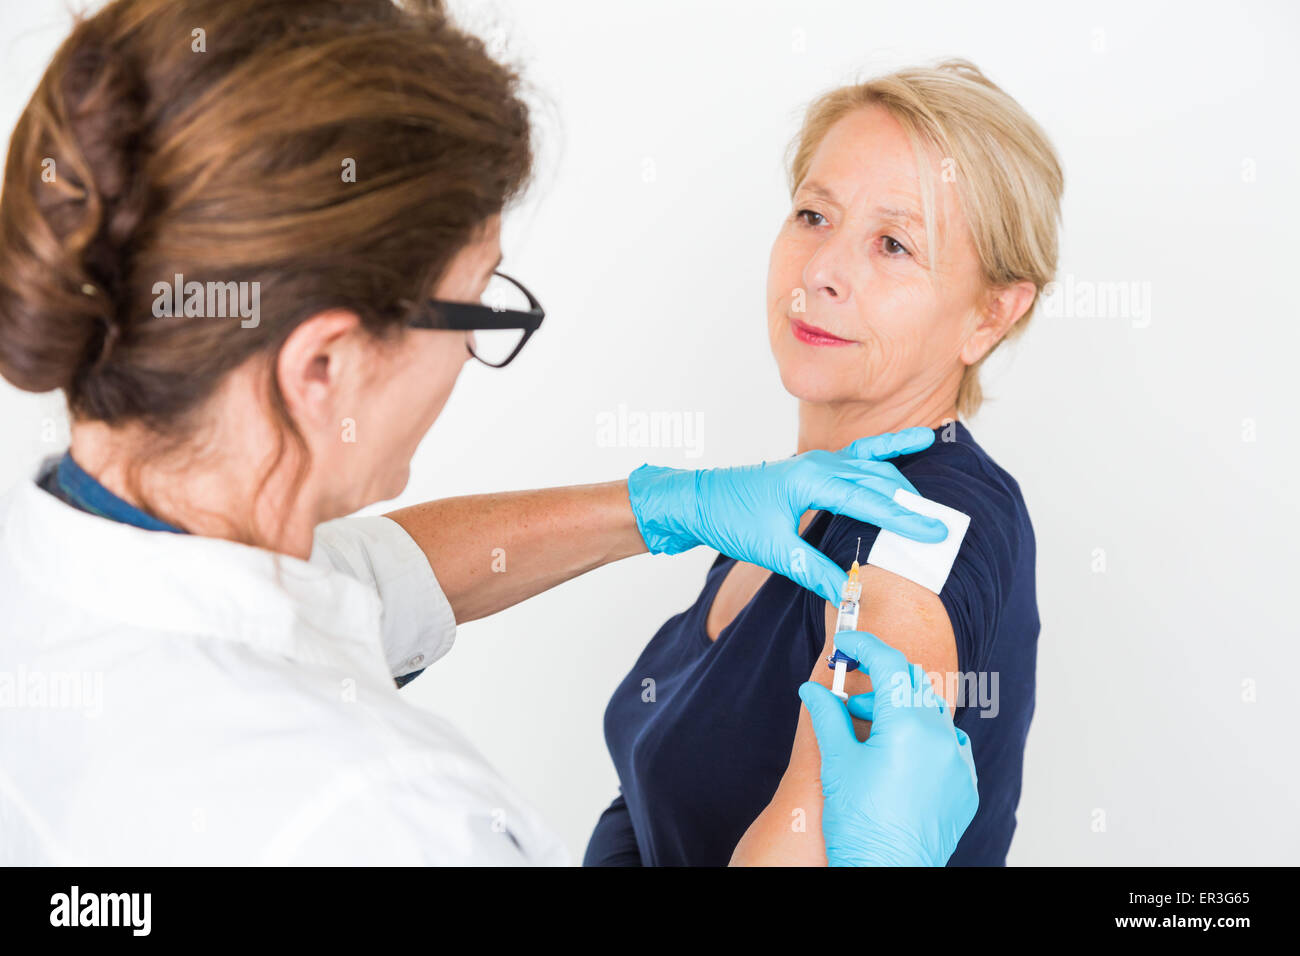 Woman receiving vaccination. Stock Photo